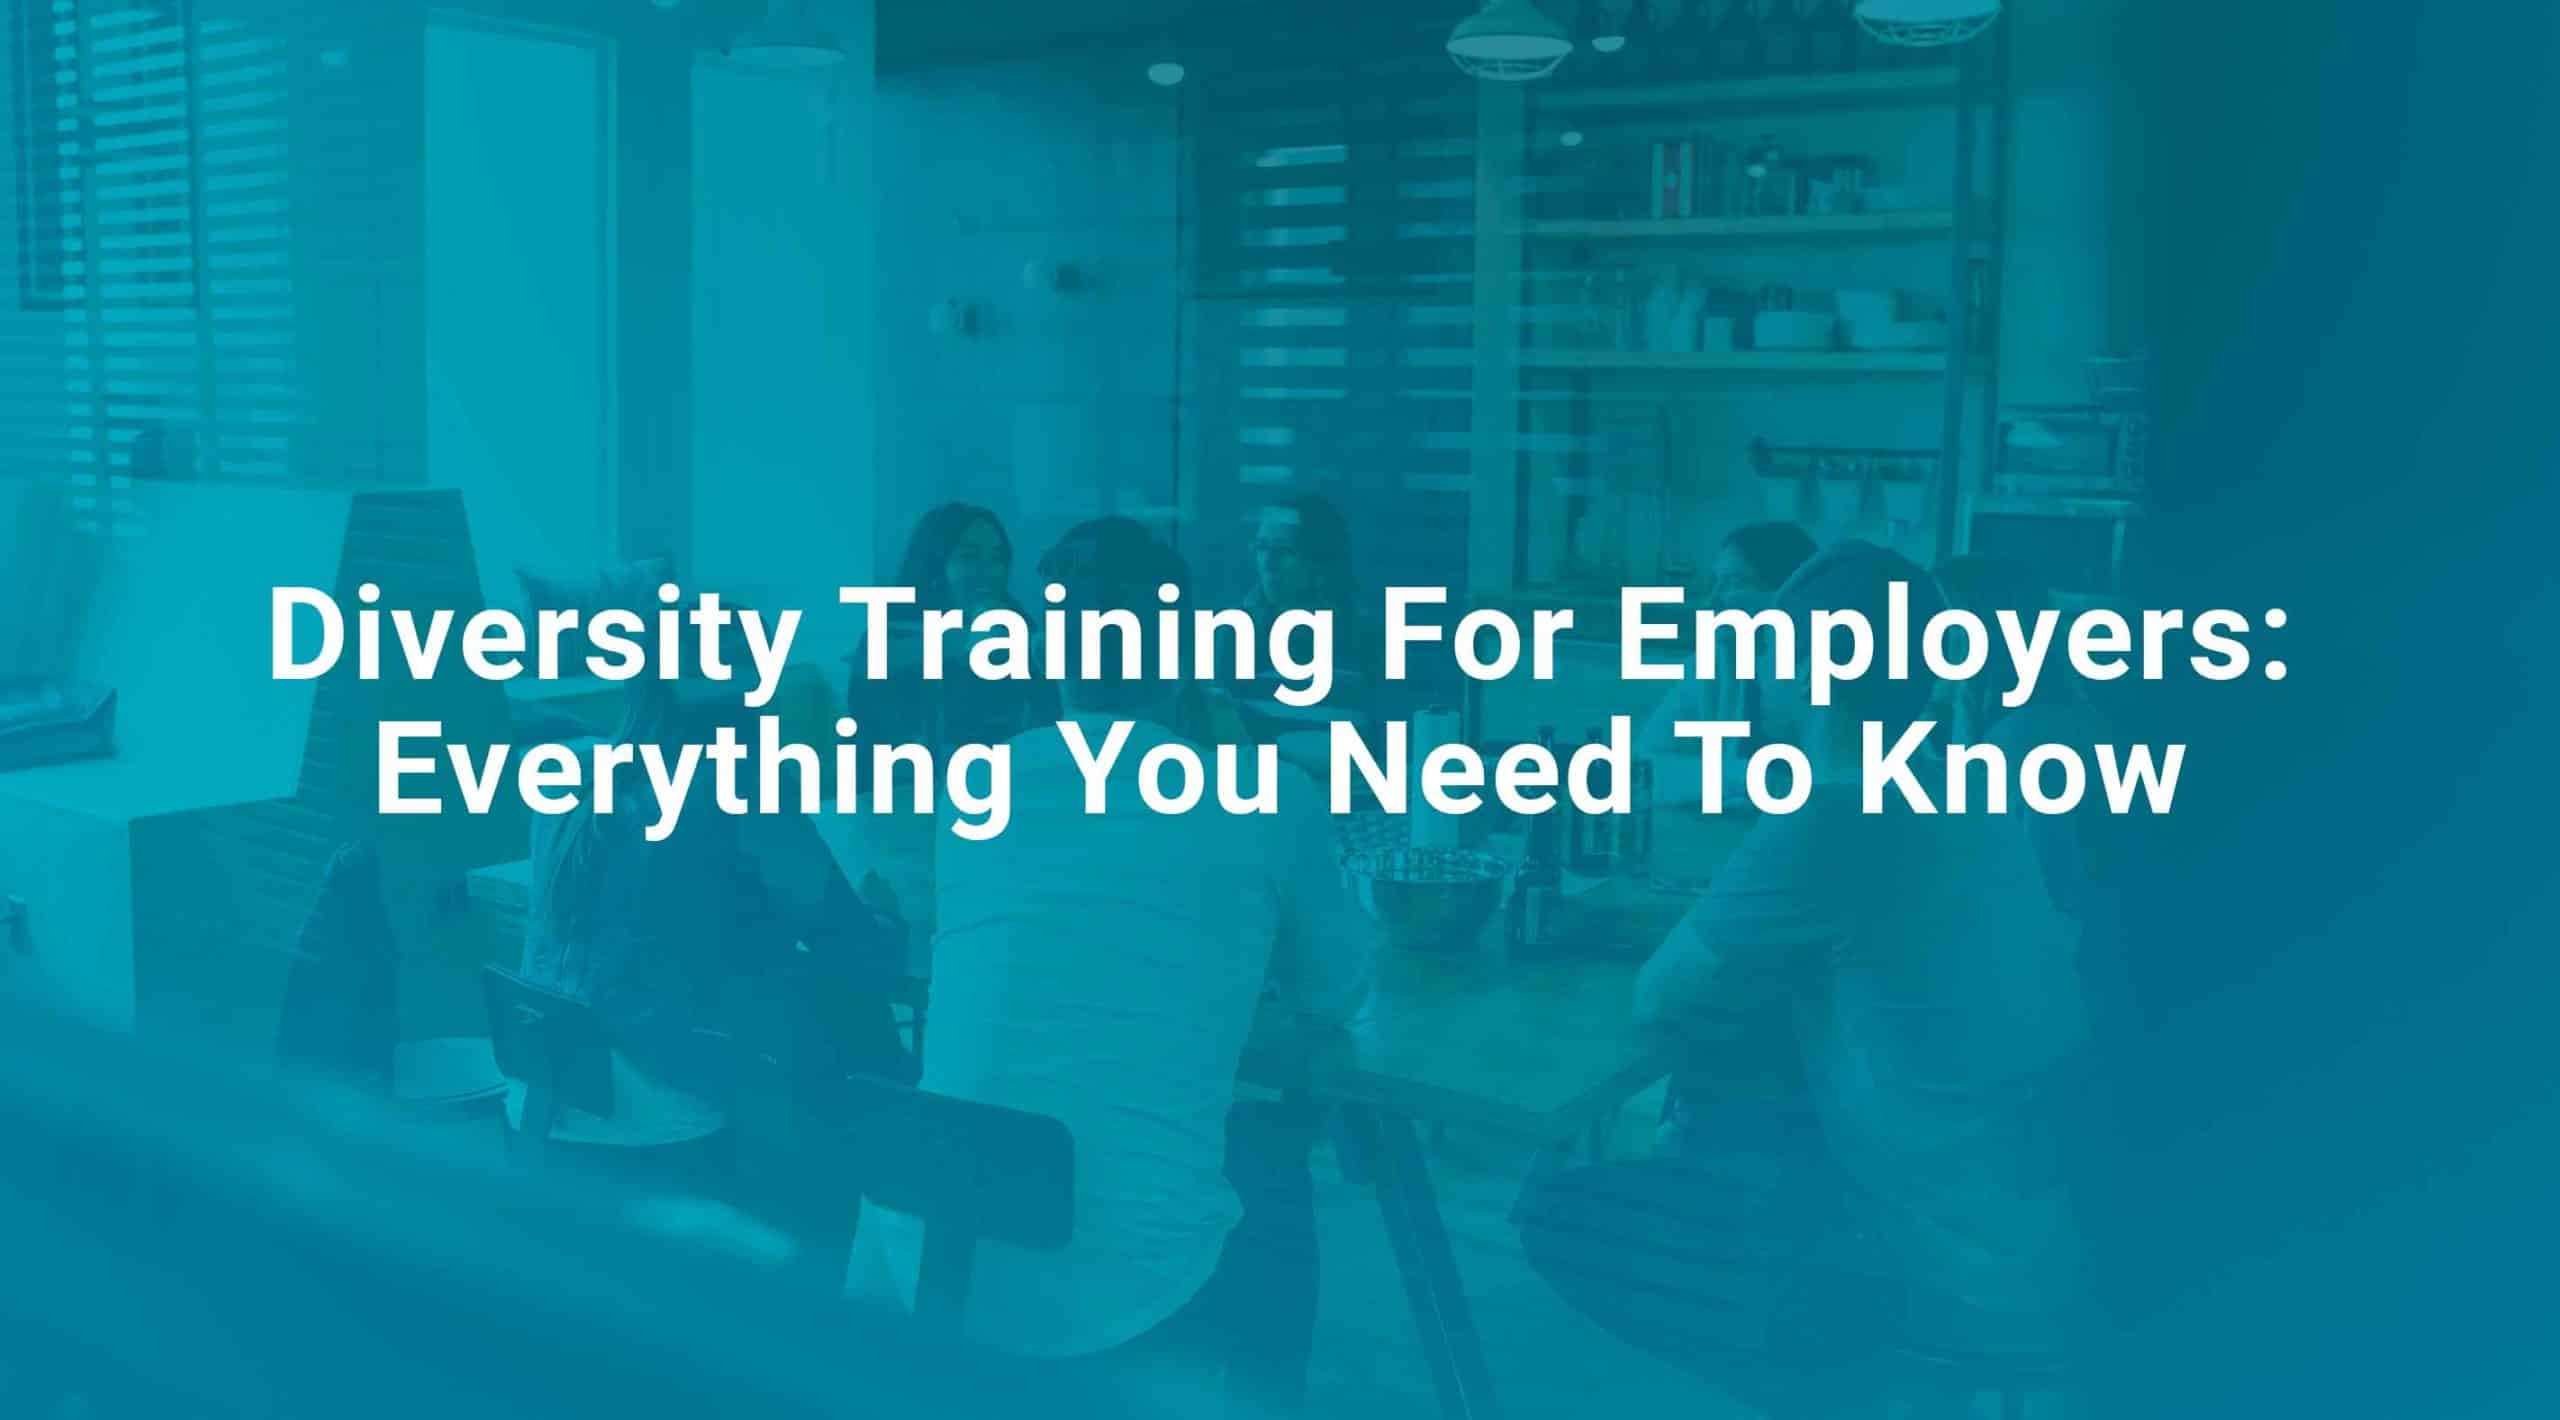 Diversity Training For Employers: Everything You Need To Know